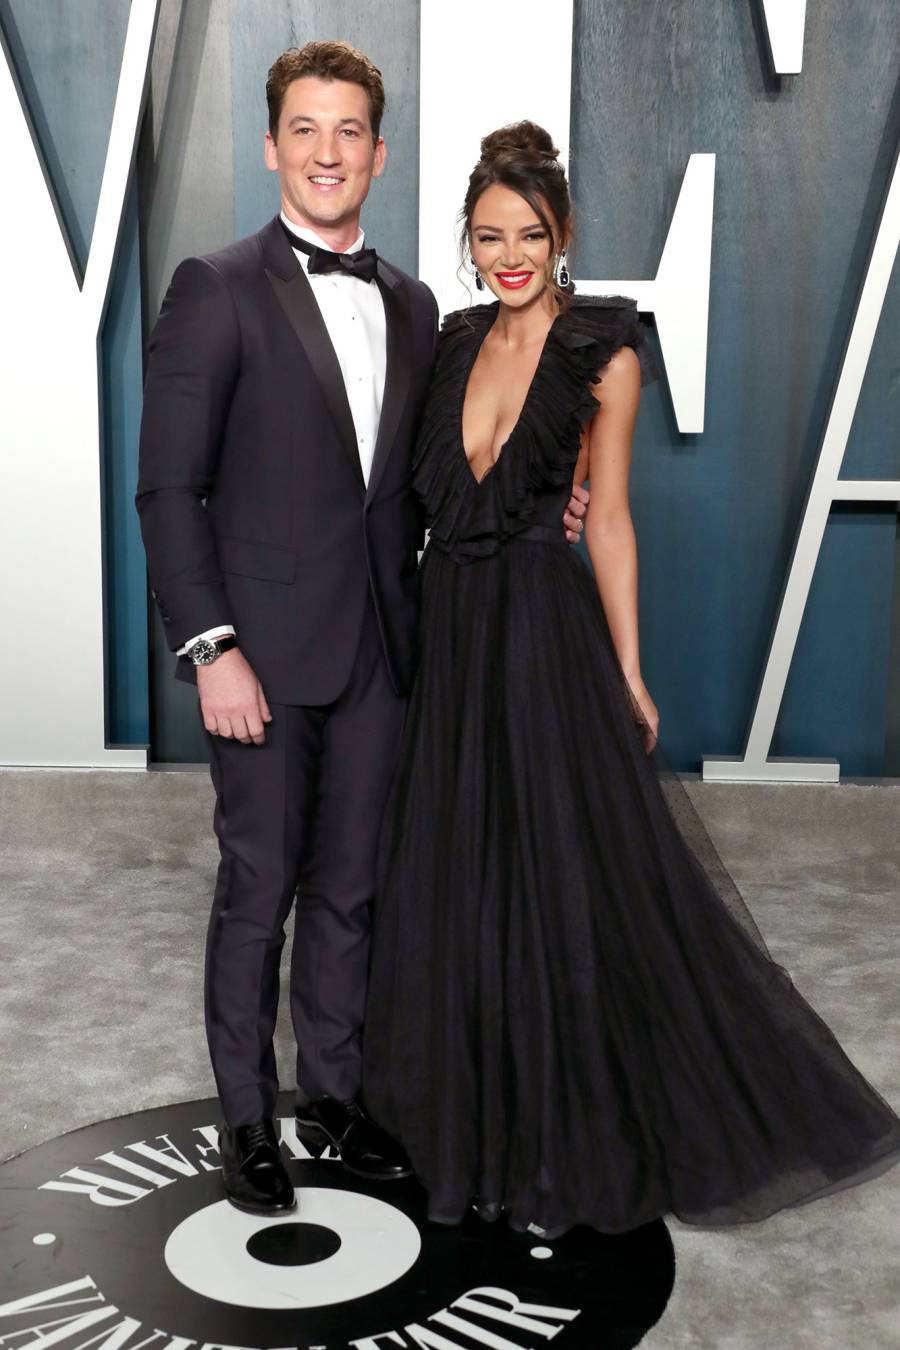 February 2020 Vanity Fair Oscar Party Red Carpet Miles Teller and Keleigh Sperry Relationship Timeline